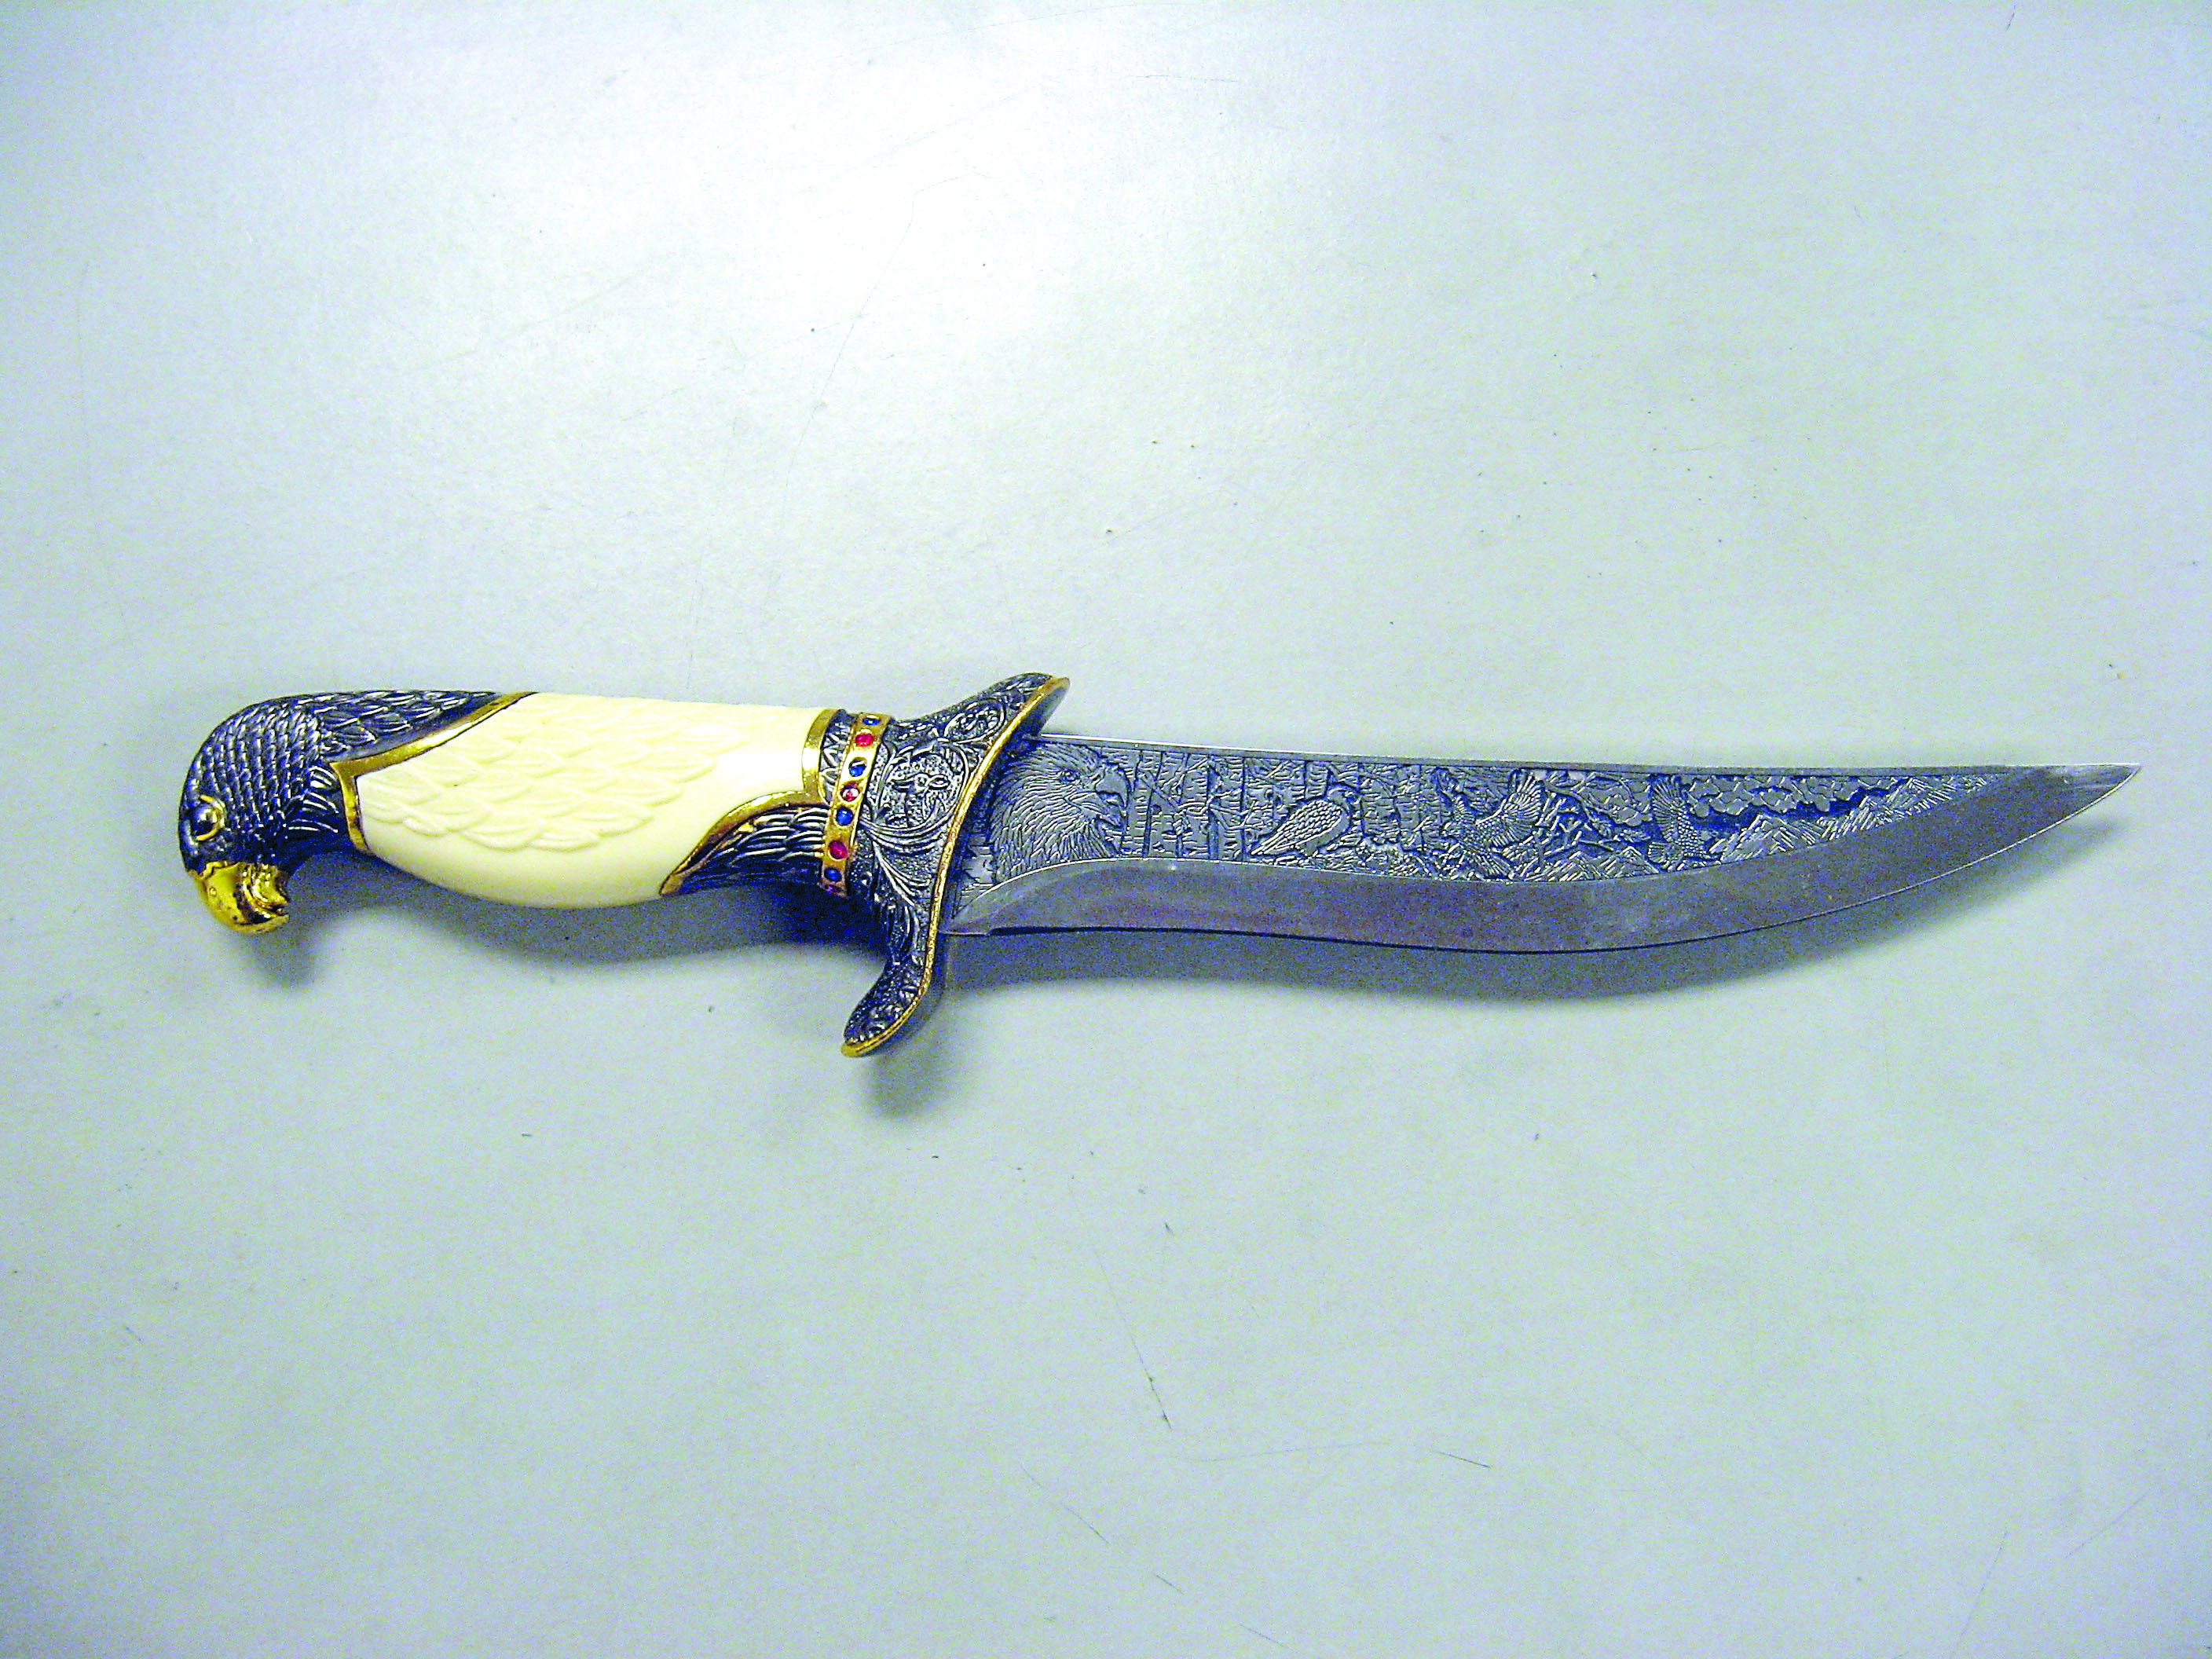 Have you seen this knife before? It could help ID Sequim assailant